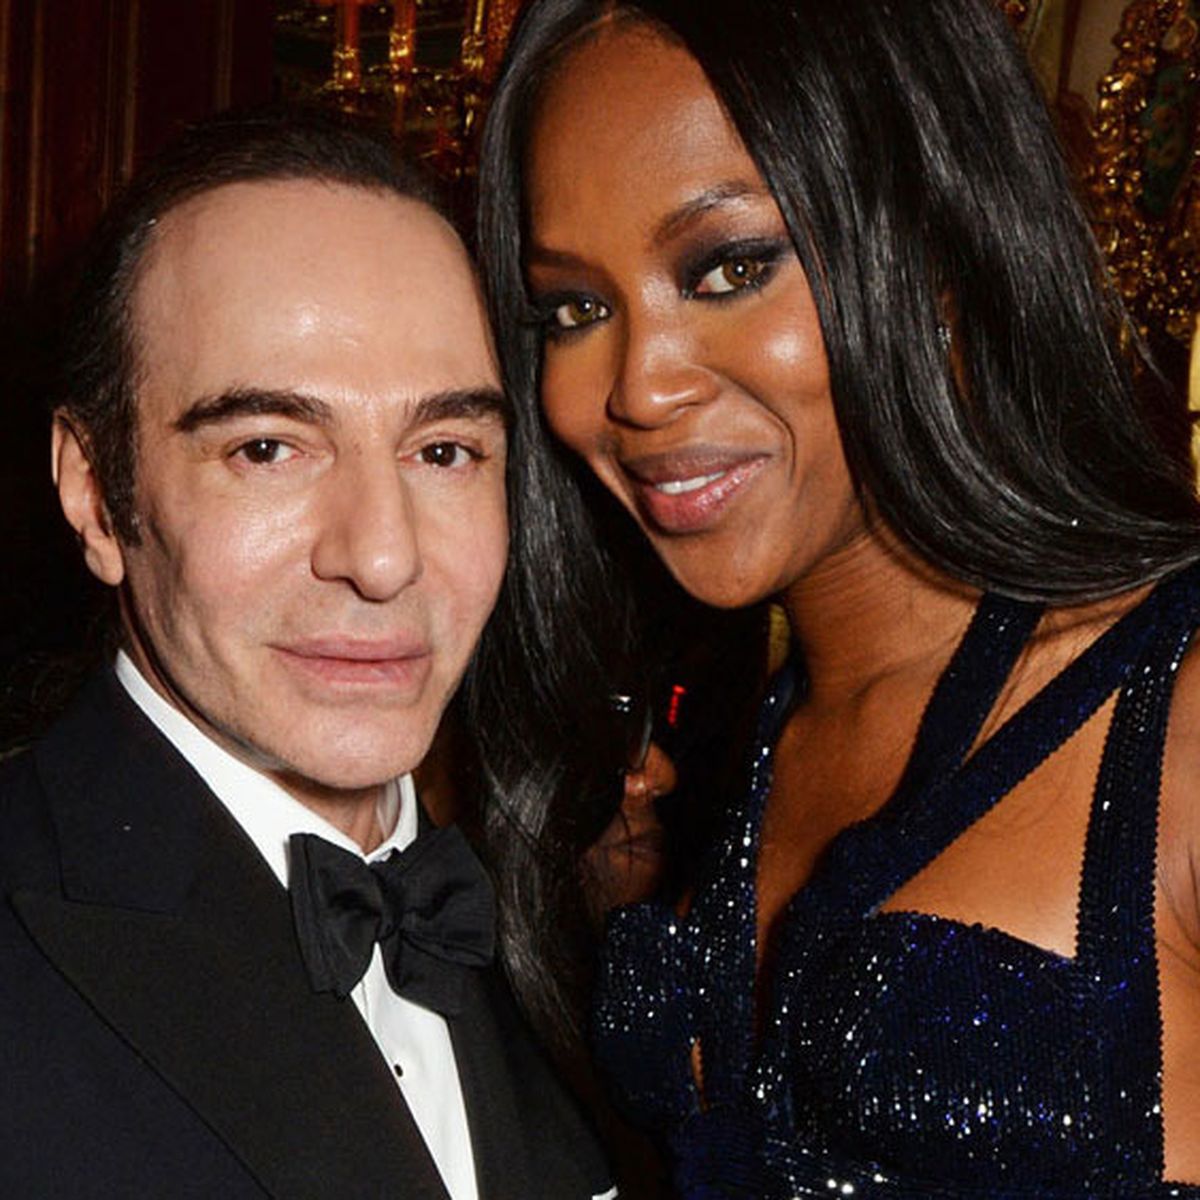 John Galliano has revealed the depth of his substance abuse in a new  interview - 9Style